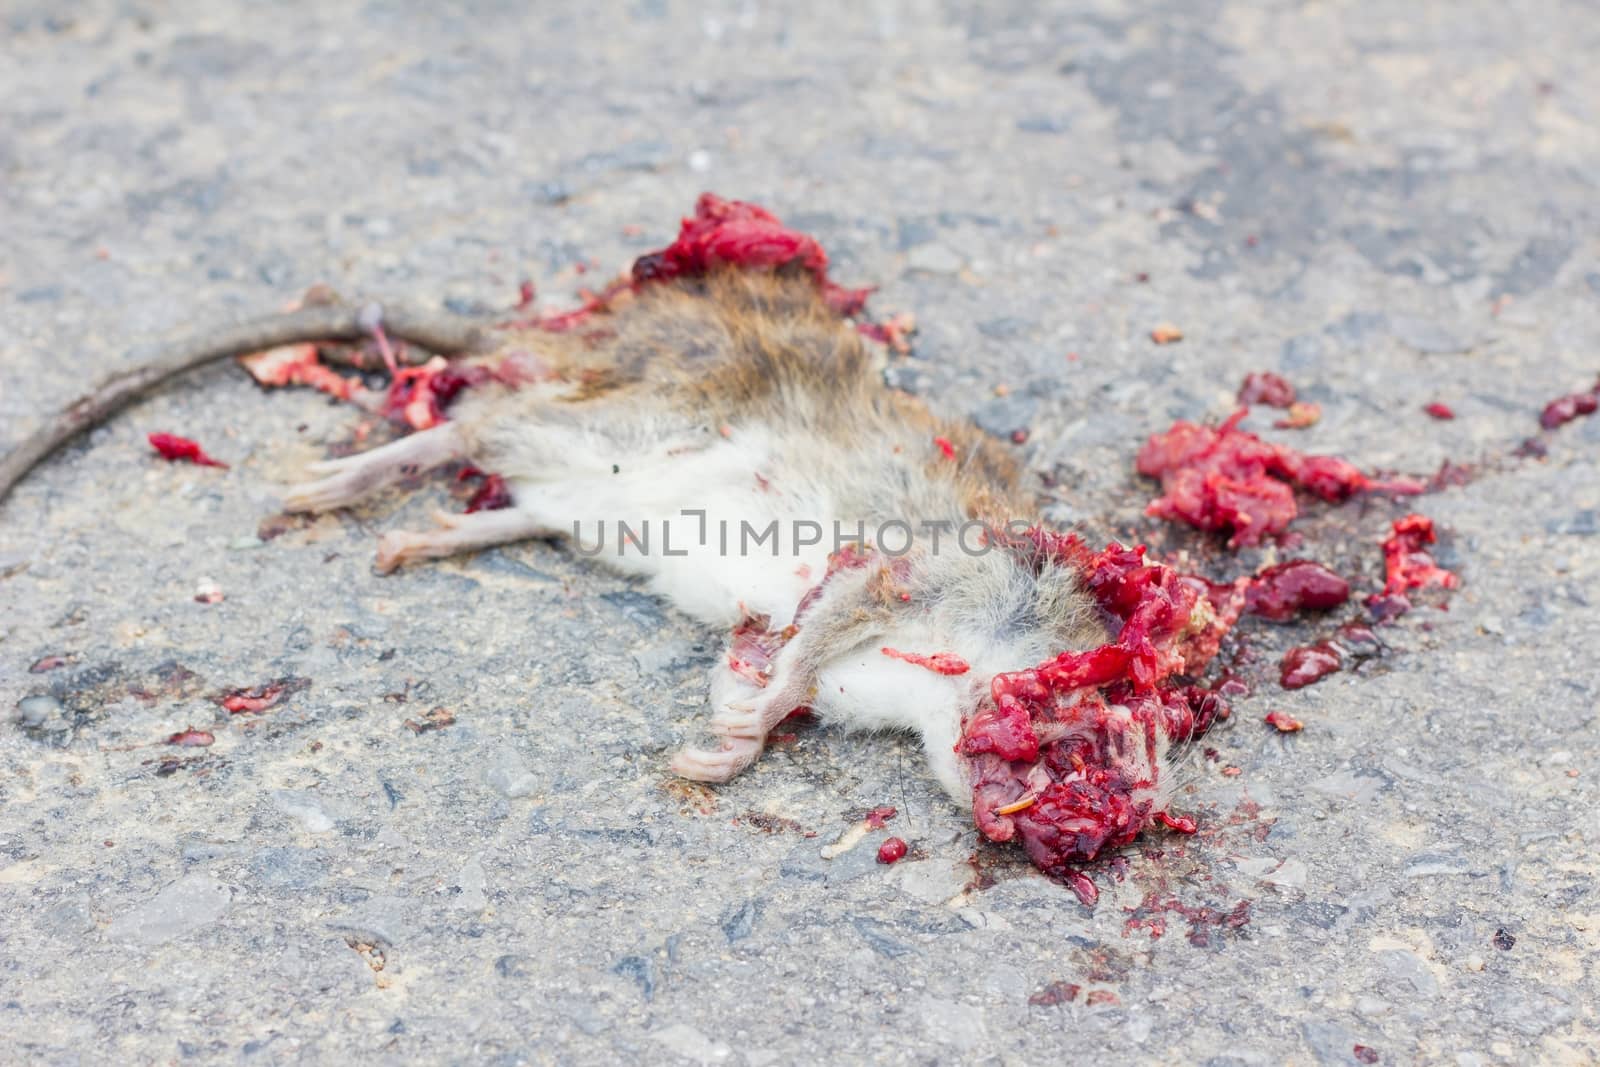 Dead rat on road by a3701027